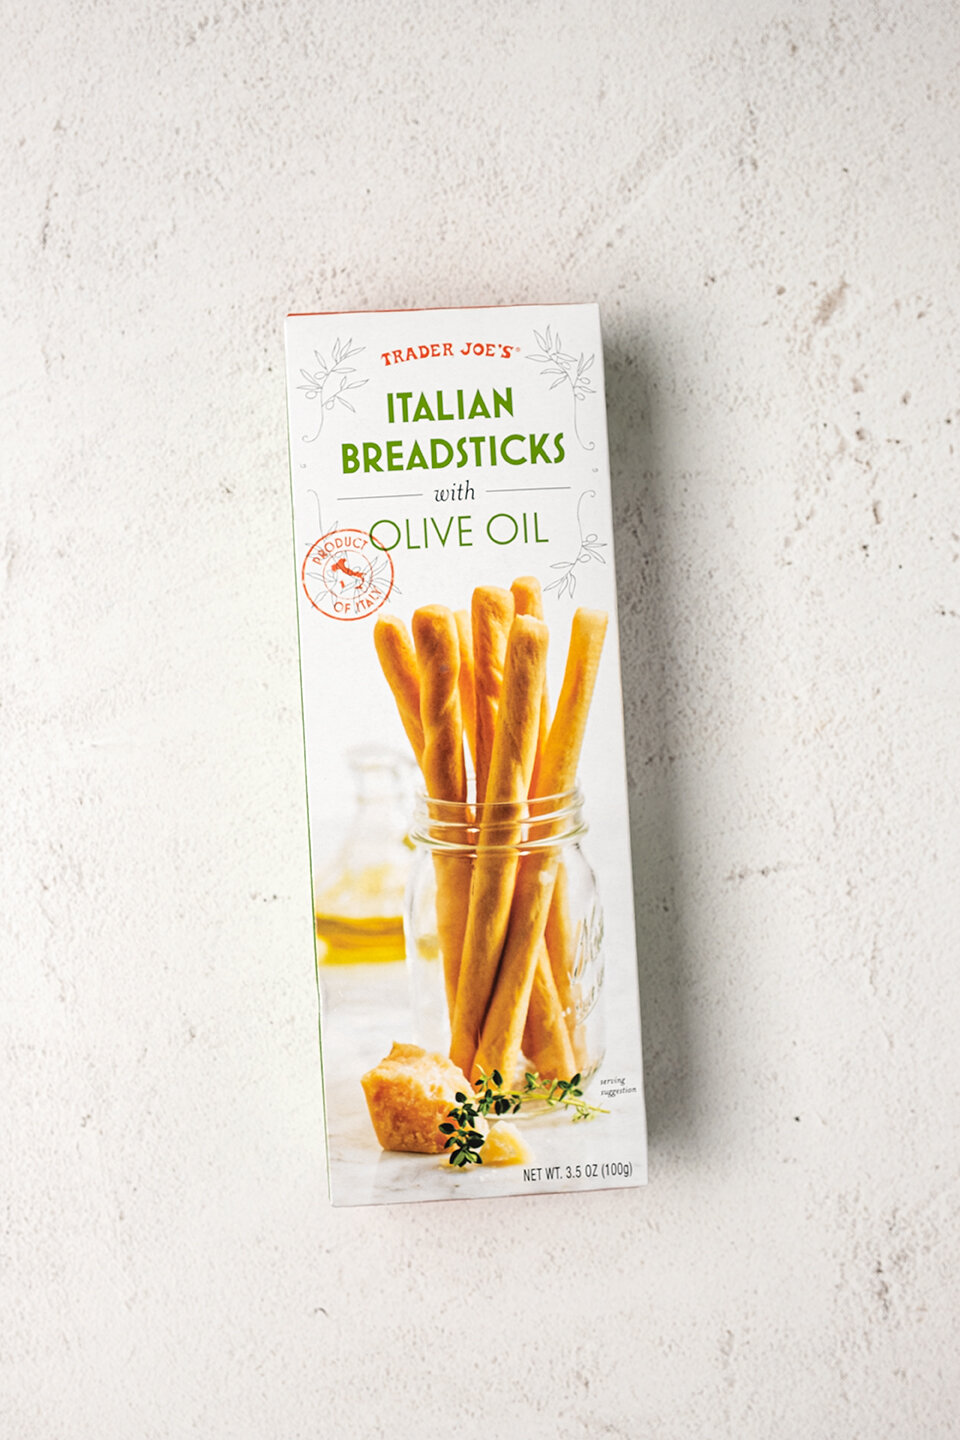 Italian Breadsticks with Olive Oil $1.49